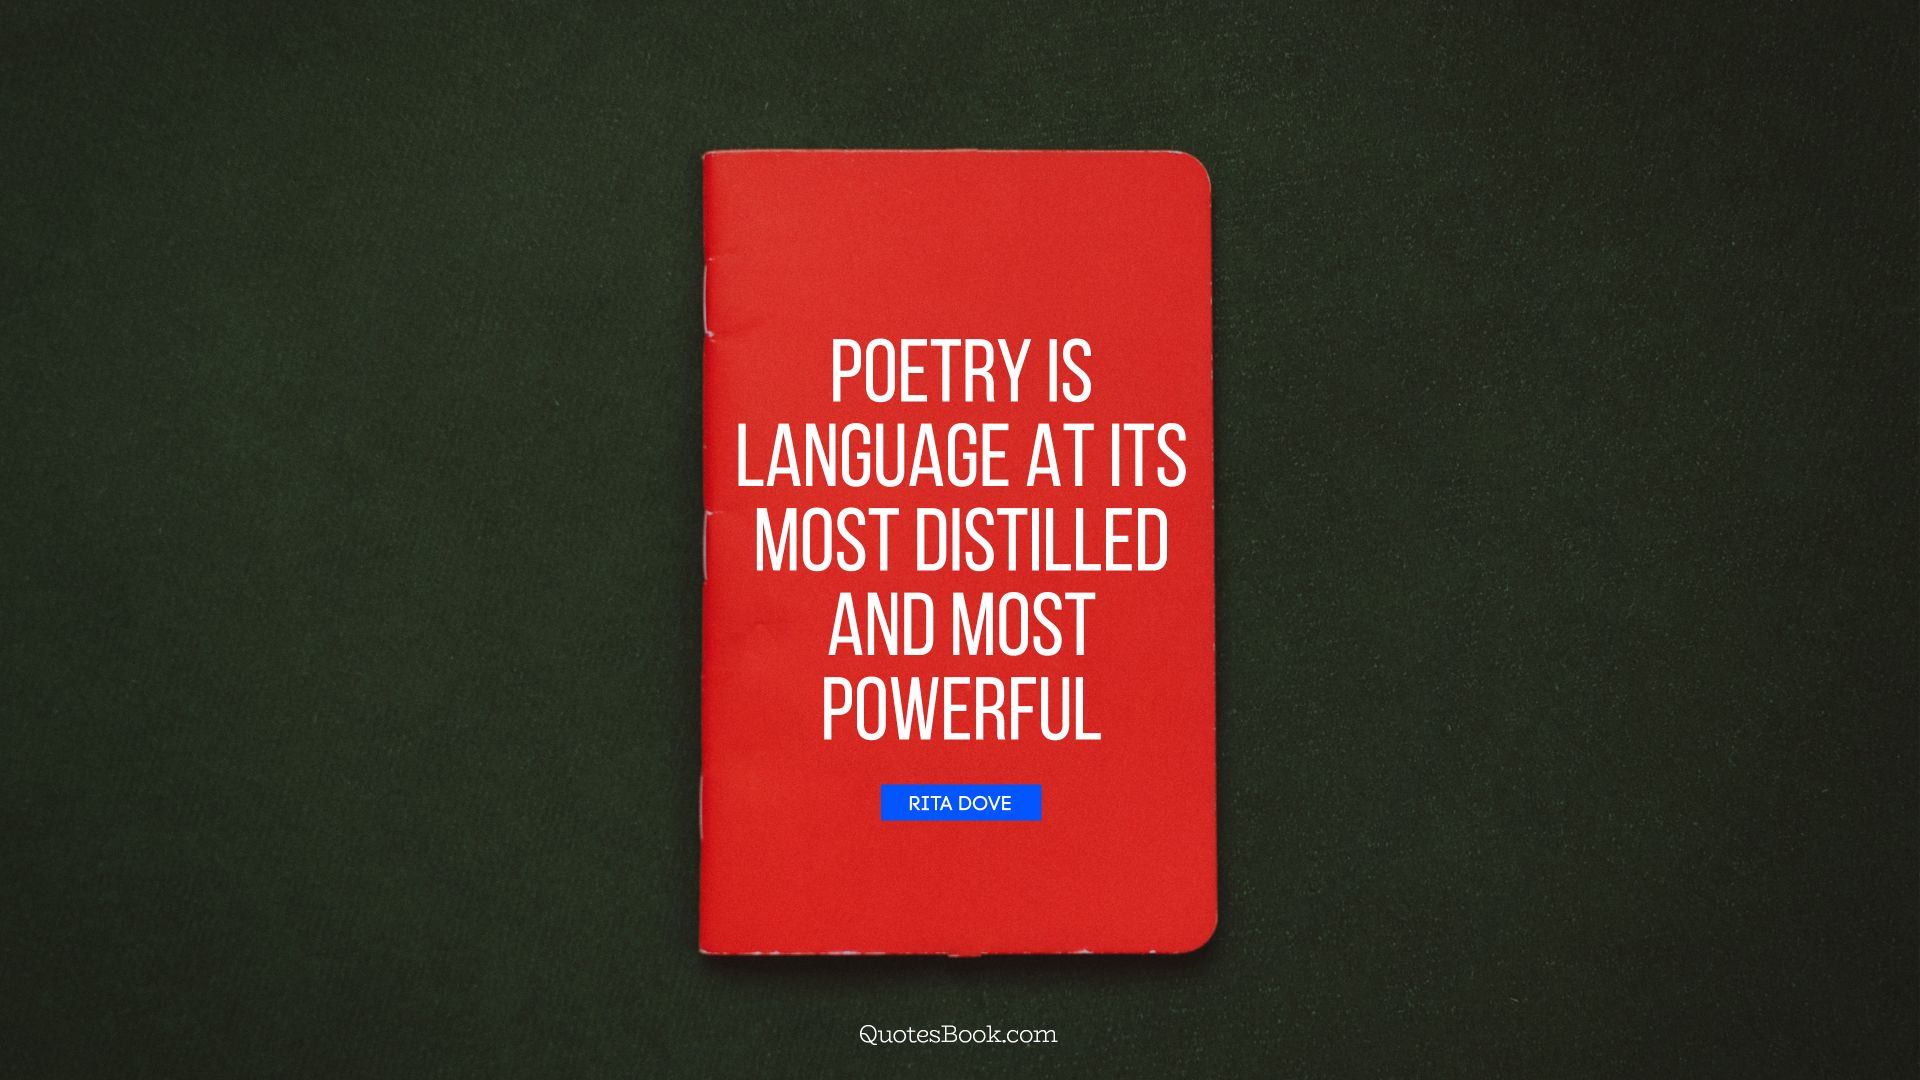 Poetry is language at its most distilled and most powerful. - Quote by Rita Dove